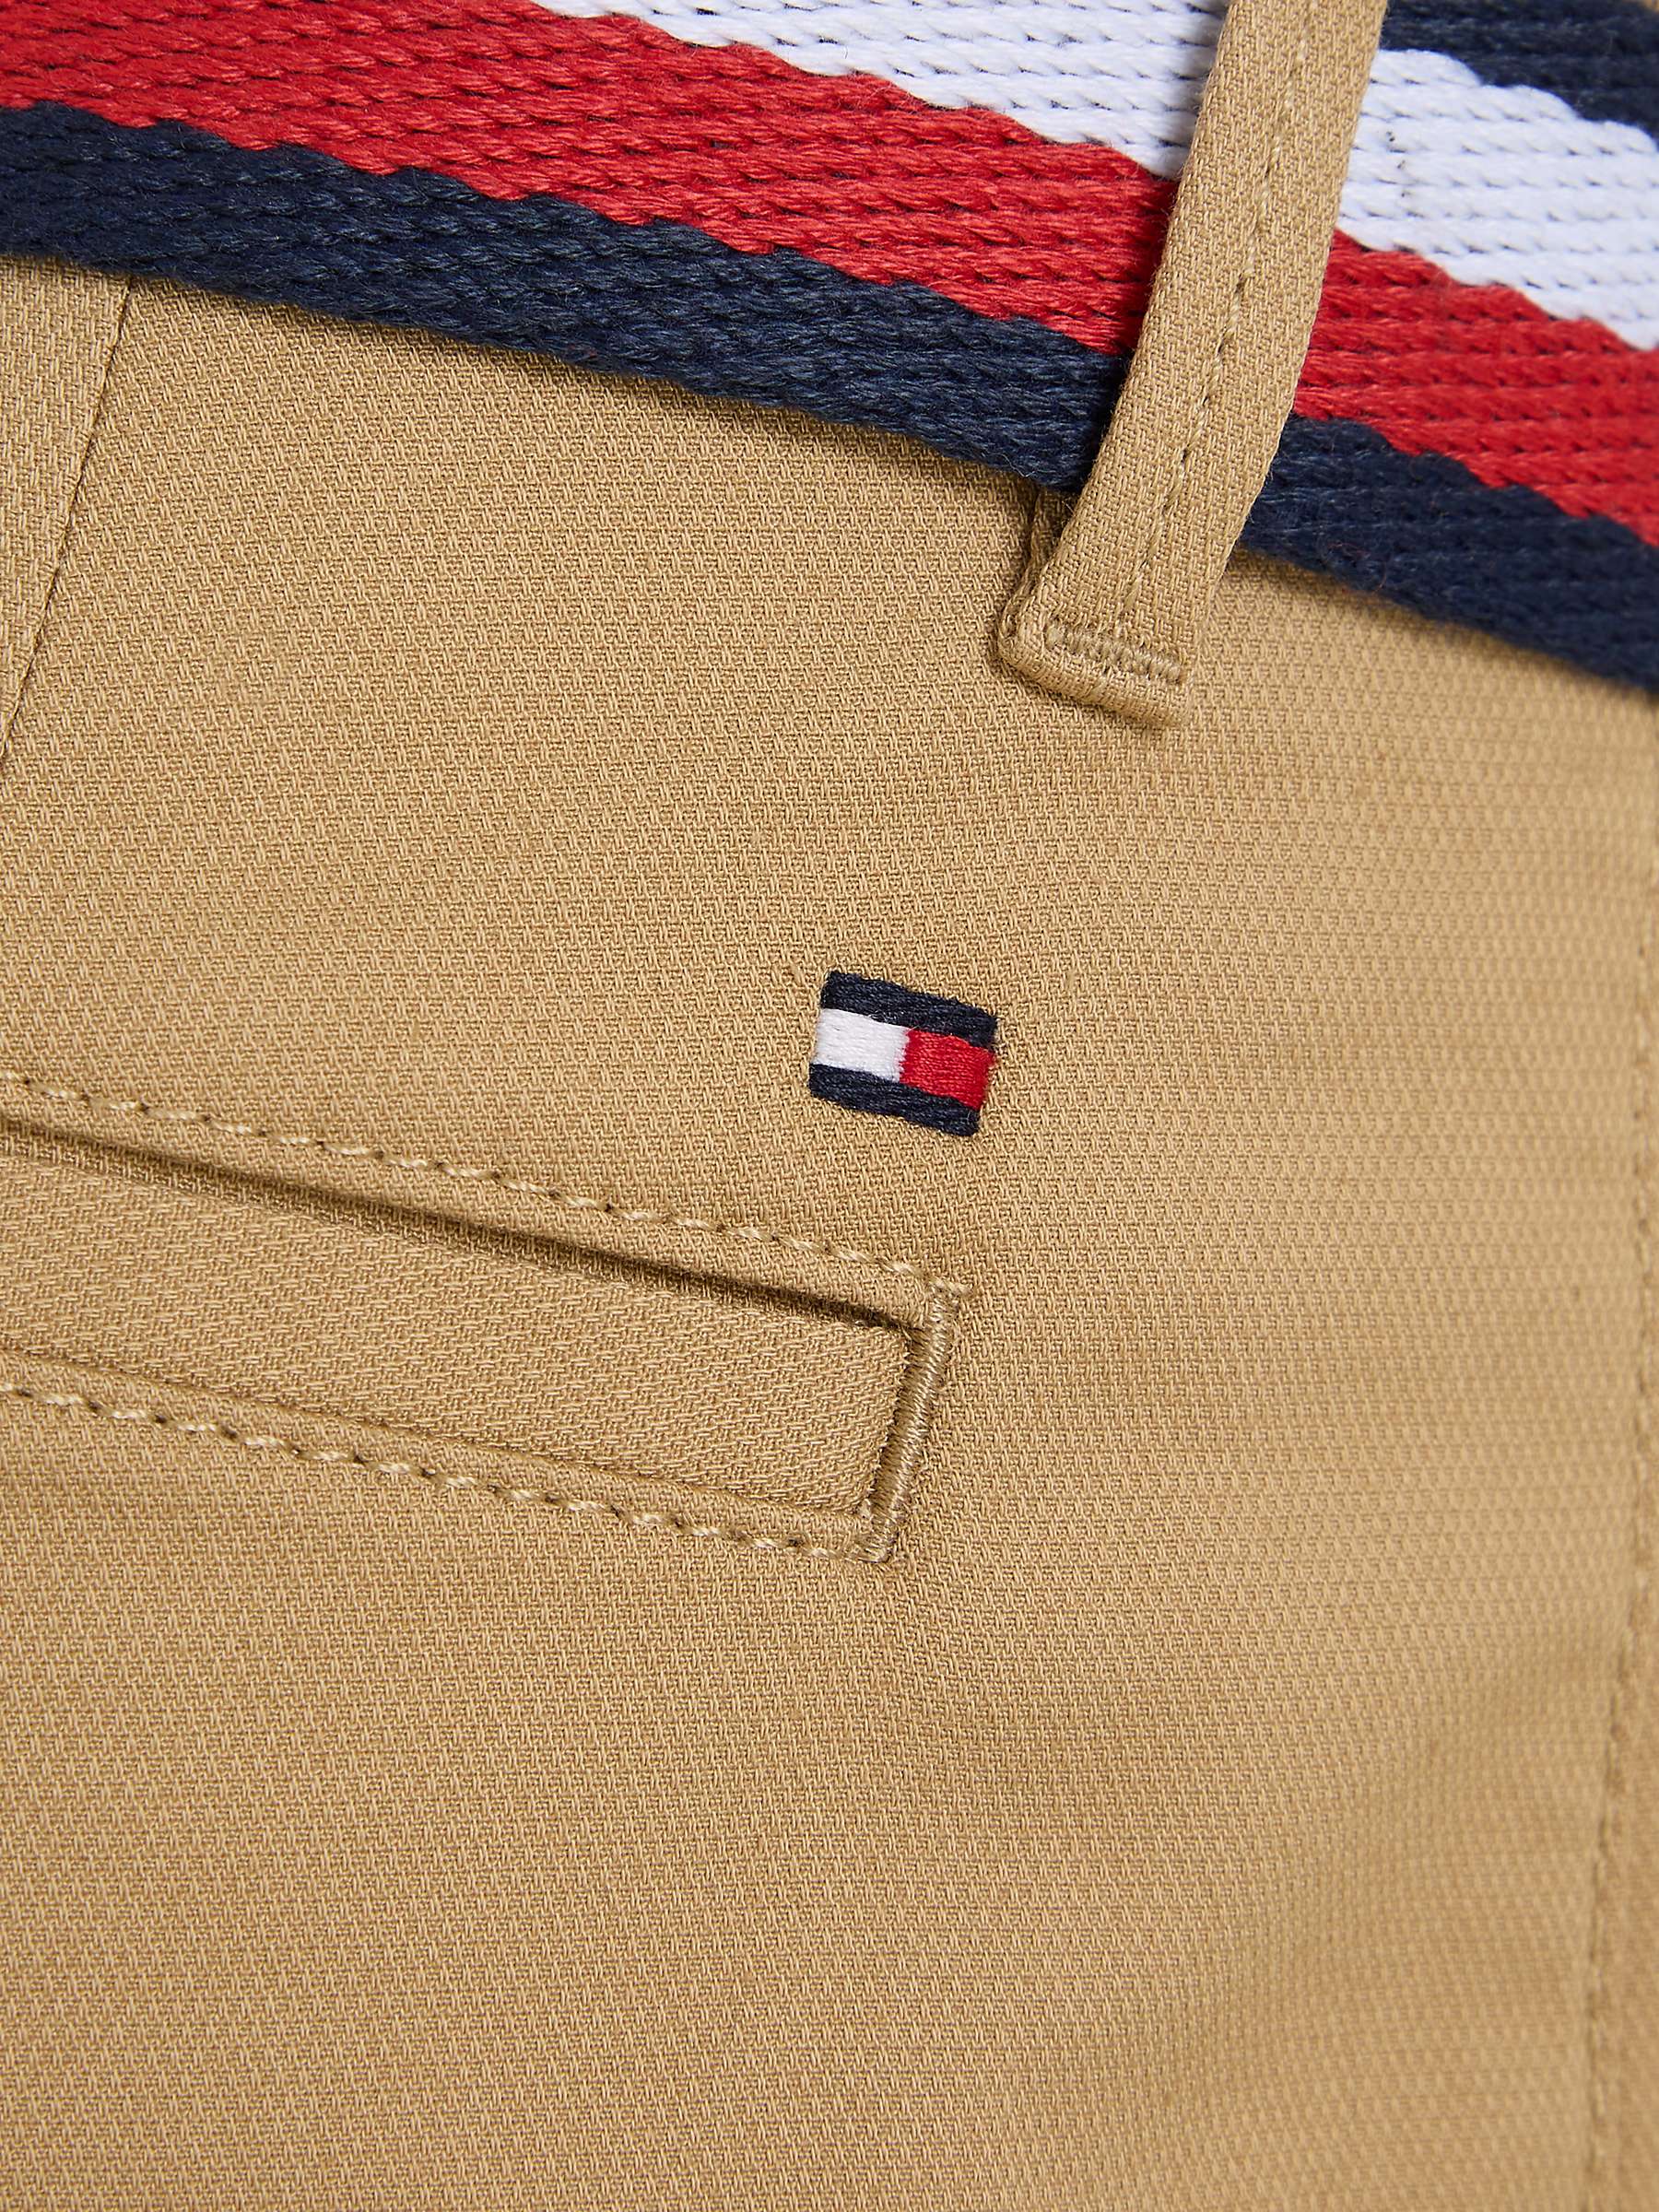 Buy Tommy Hilfiger Kids' Woven Belted Chino Shorts, Classic Khaki Online at johnlewis.com